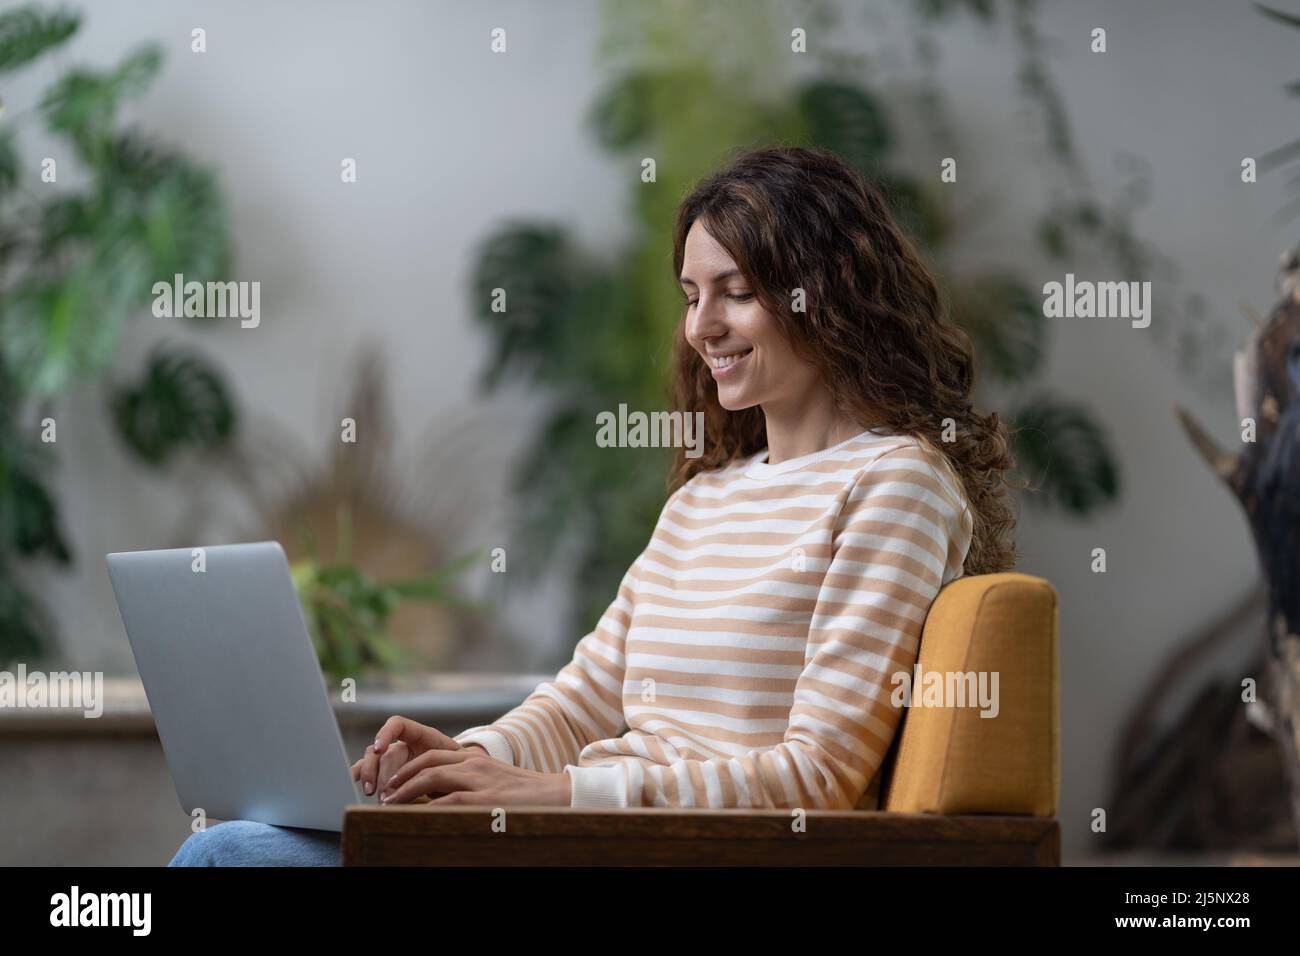 Freelancer young woman sitting in armchair in greenhouse, working on laptop surrounded by houseplant Stock Photo